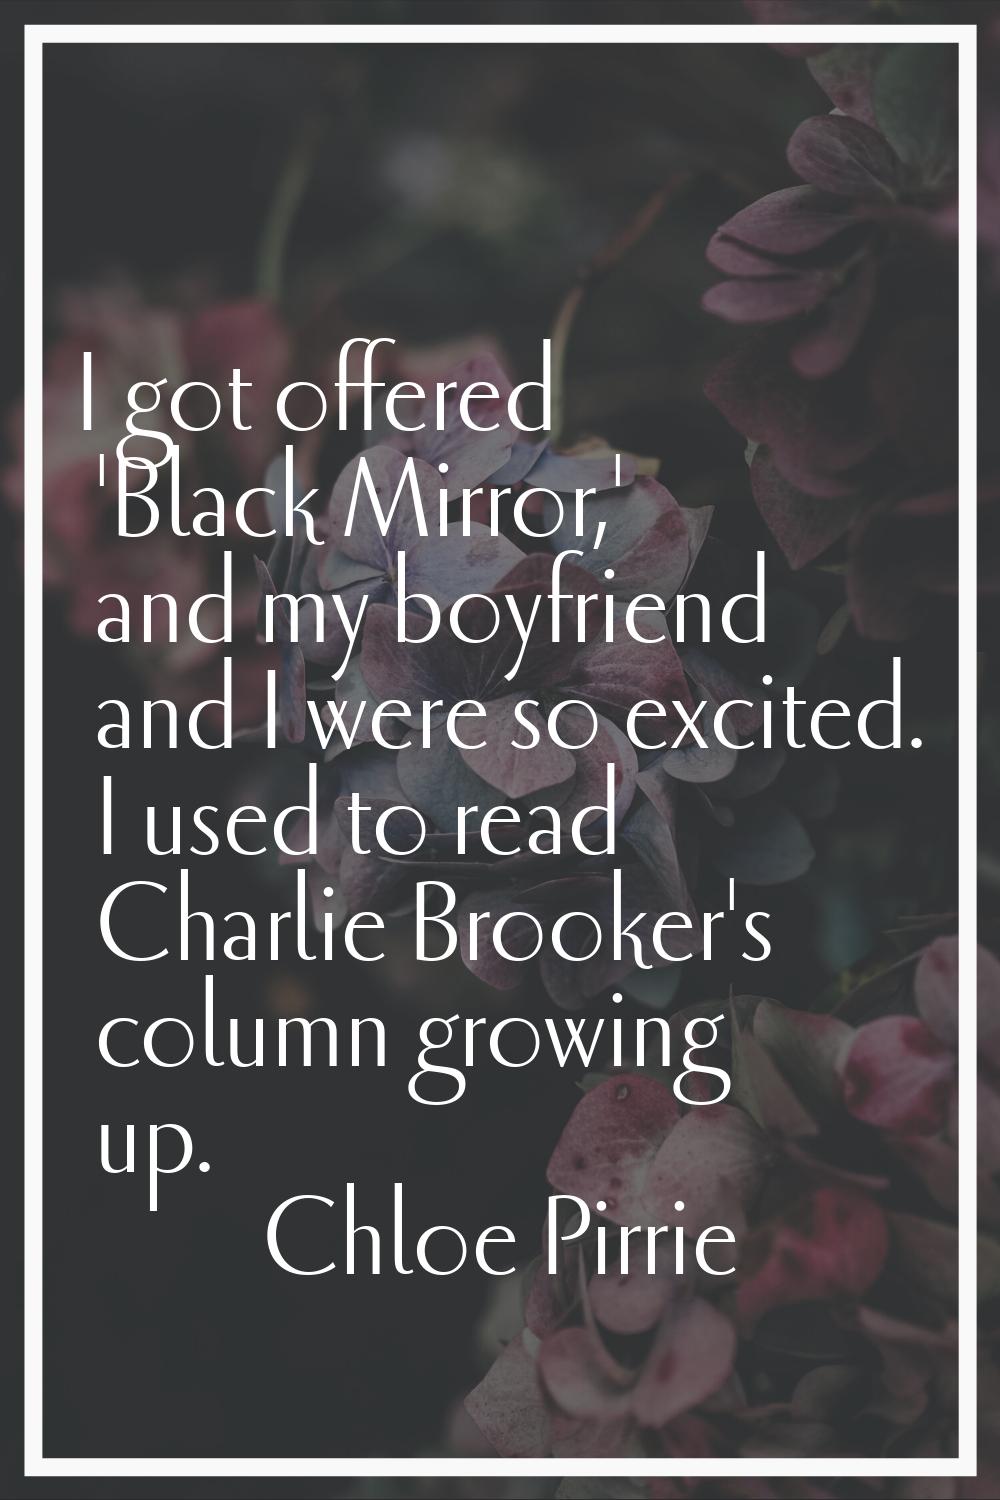 I got offered 'Black Mirror,' and my boyfriend and I were so excited. I used to read Charlie Brooke